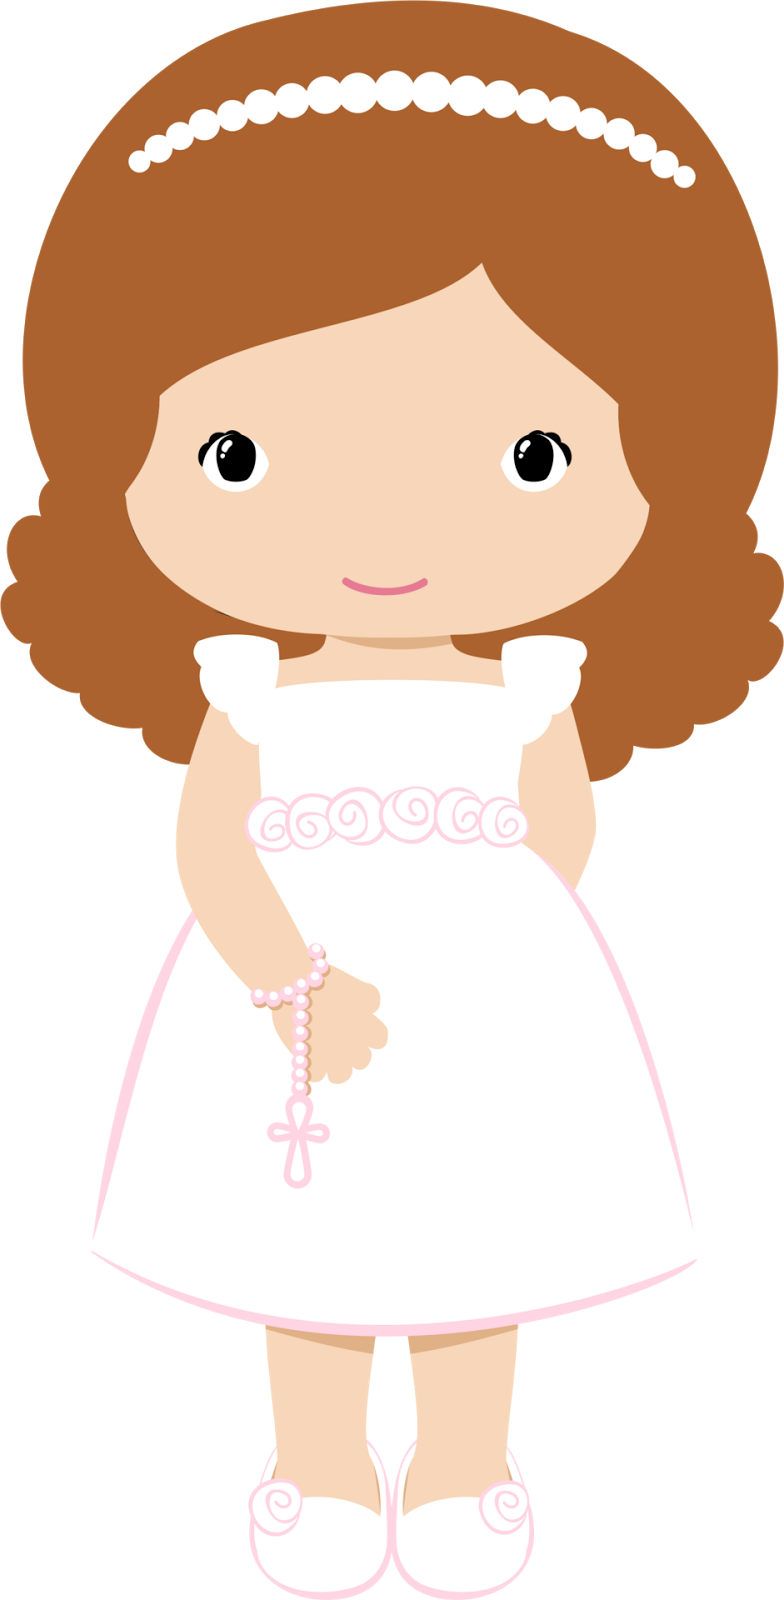 416 First Communion free clipart.